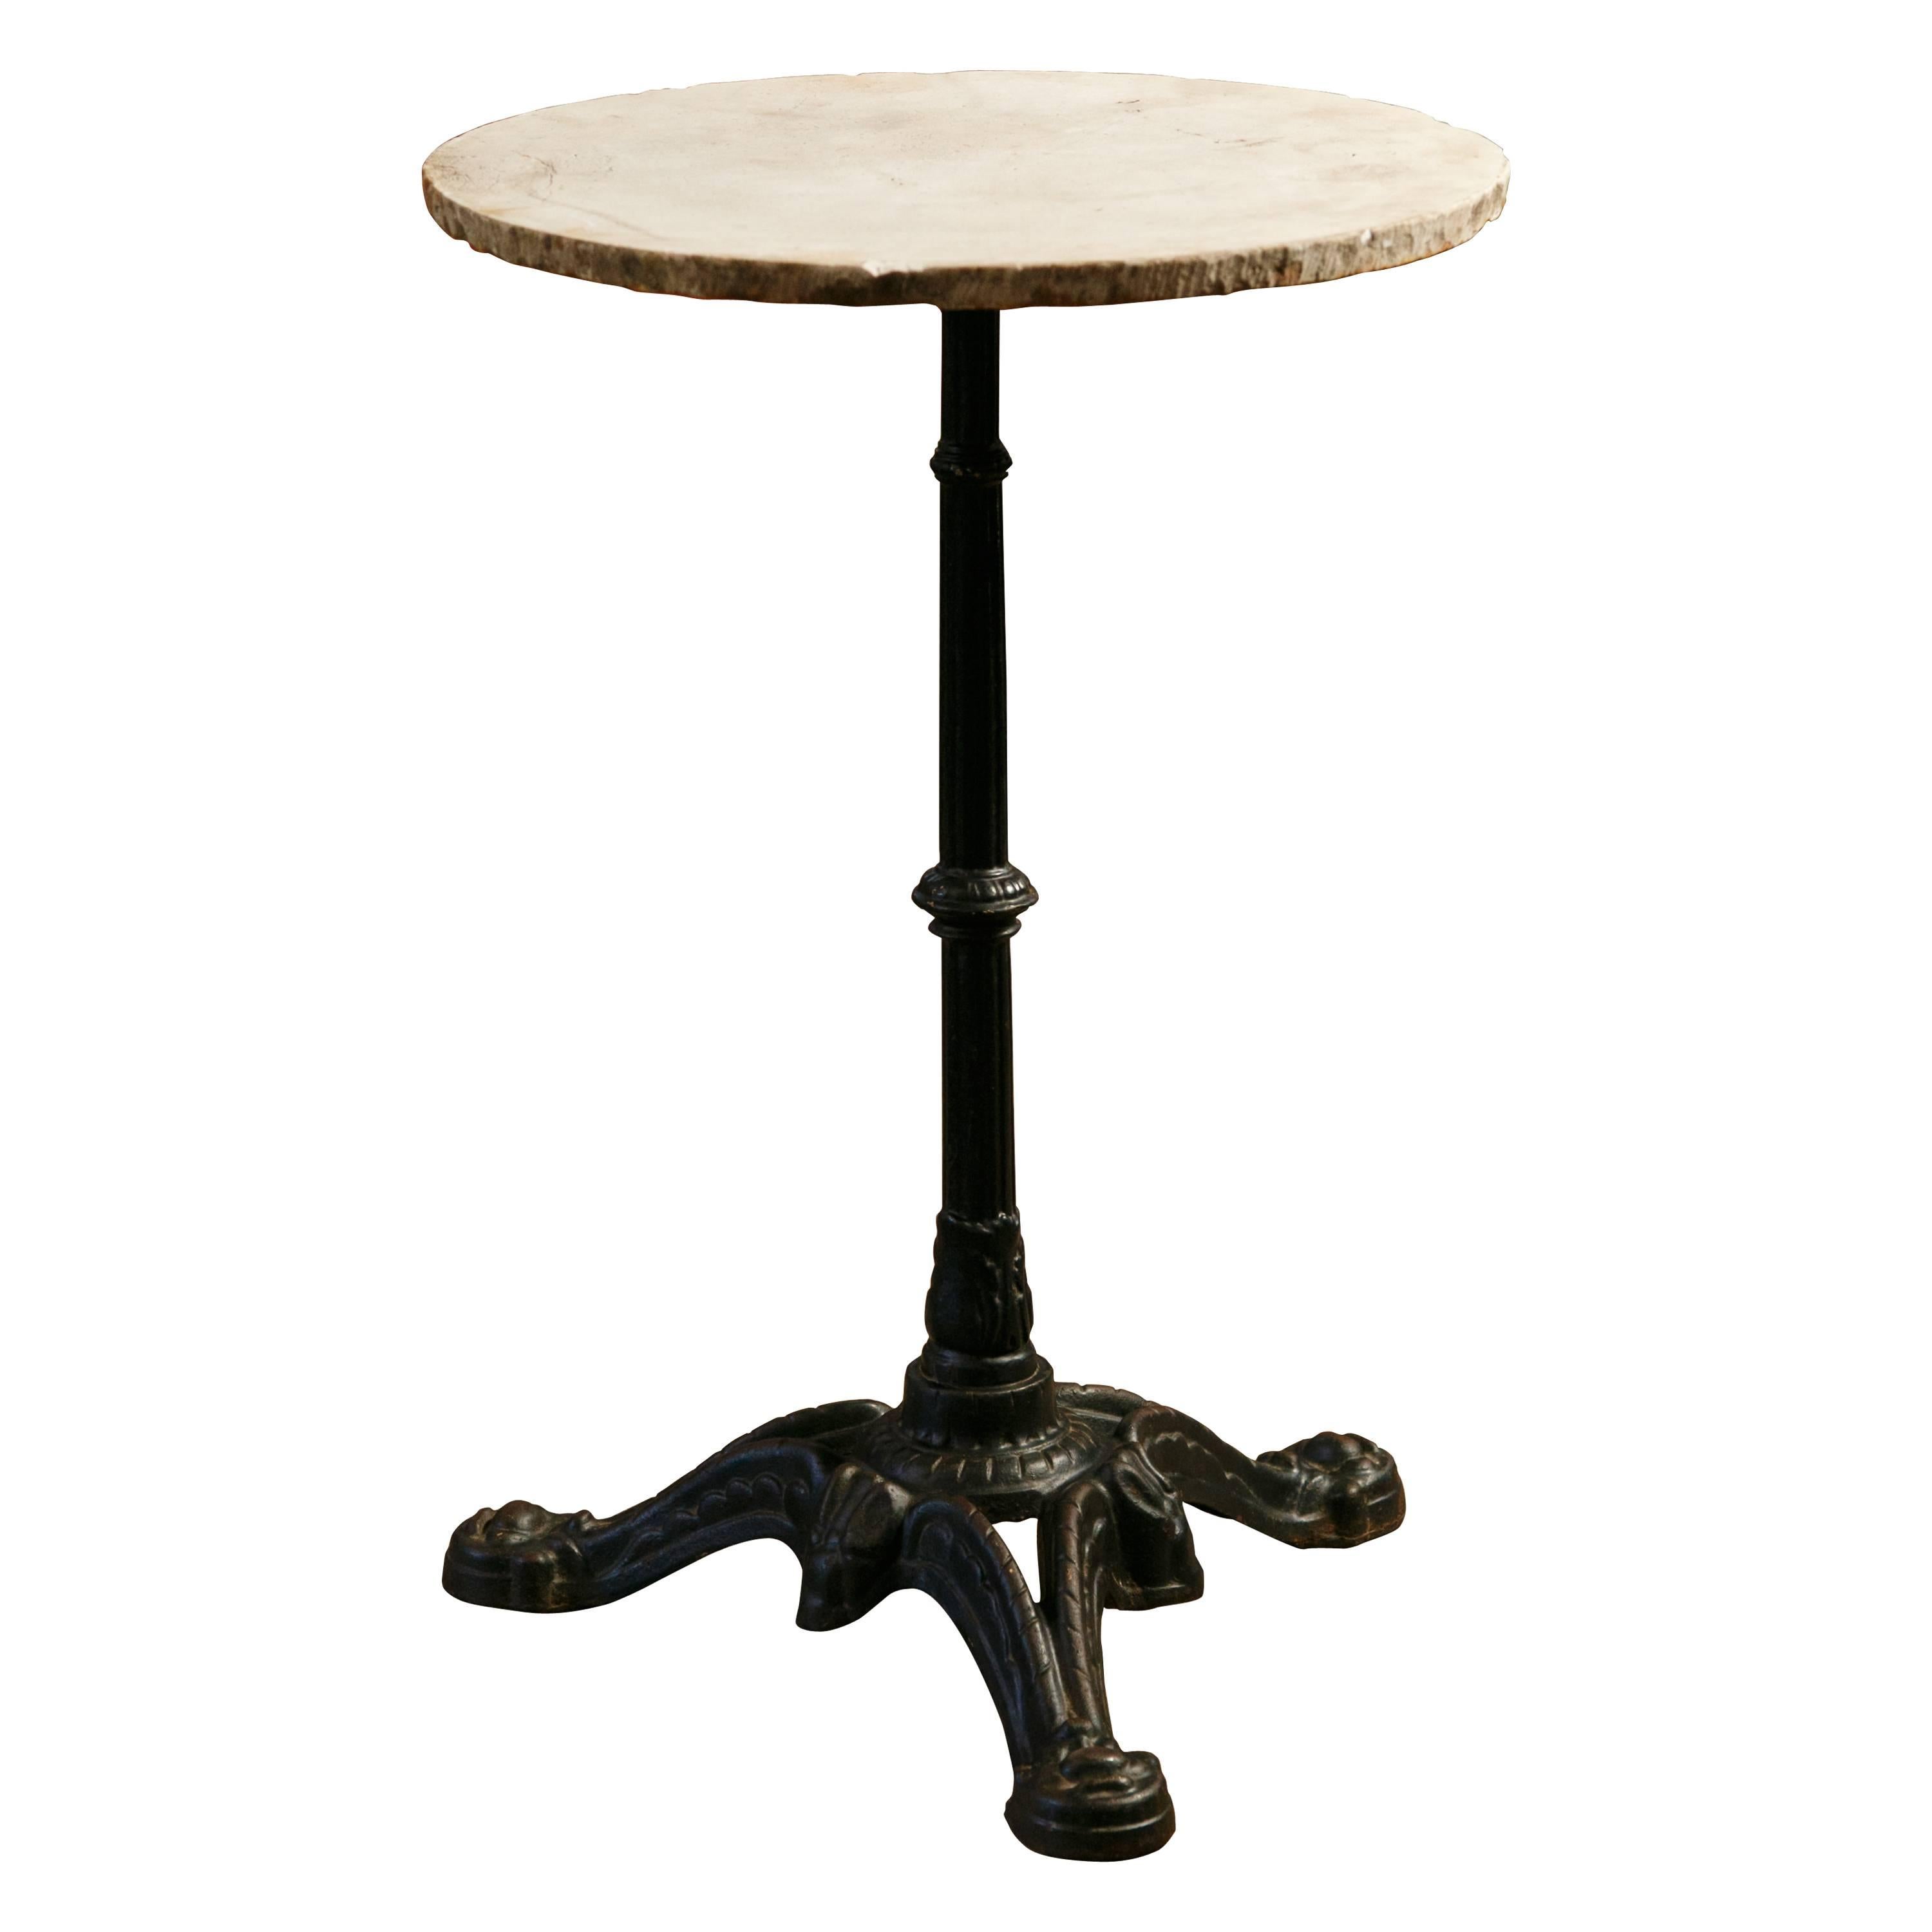 Black Iron Bistro Table with Raw Edge Honed Marble Top from France, circa 1900